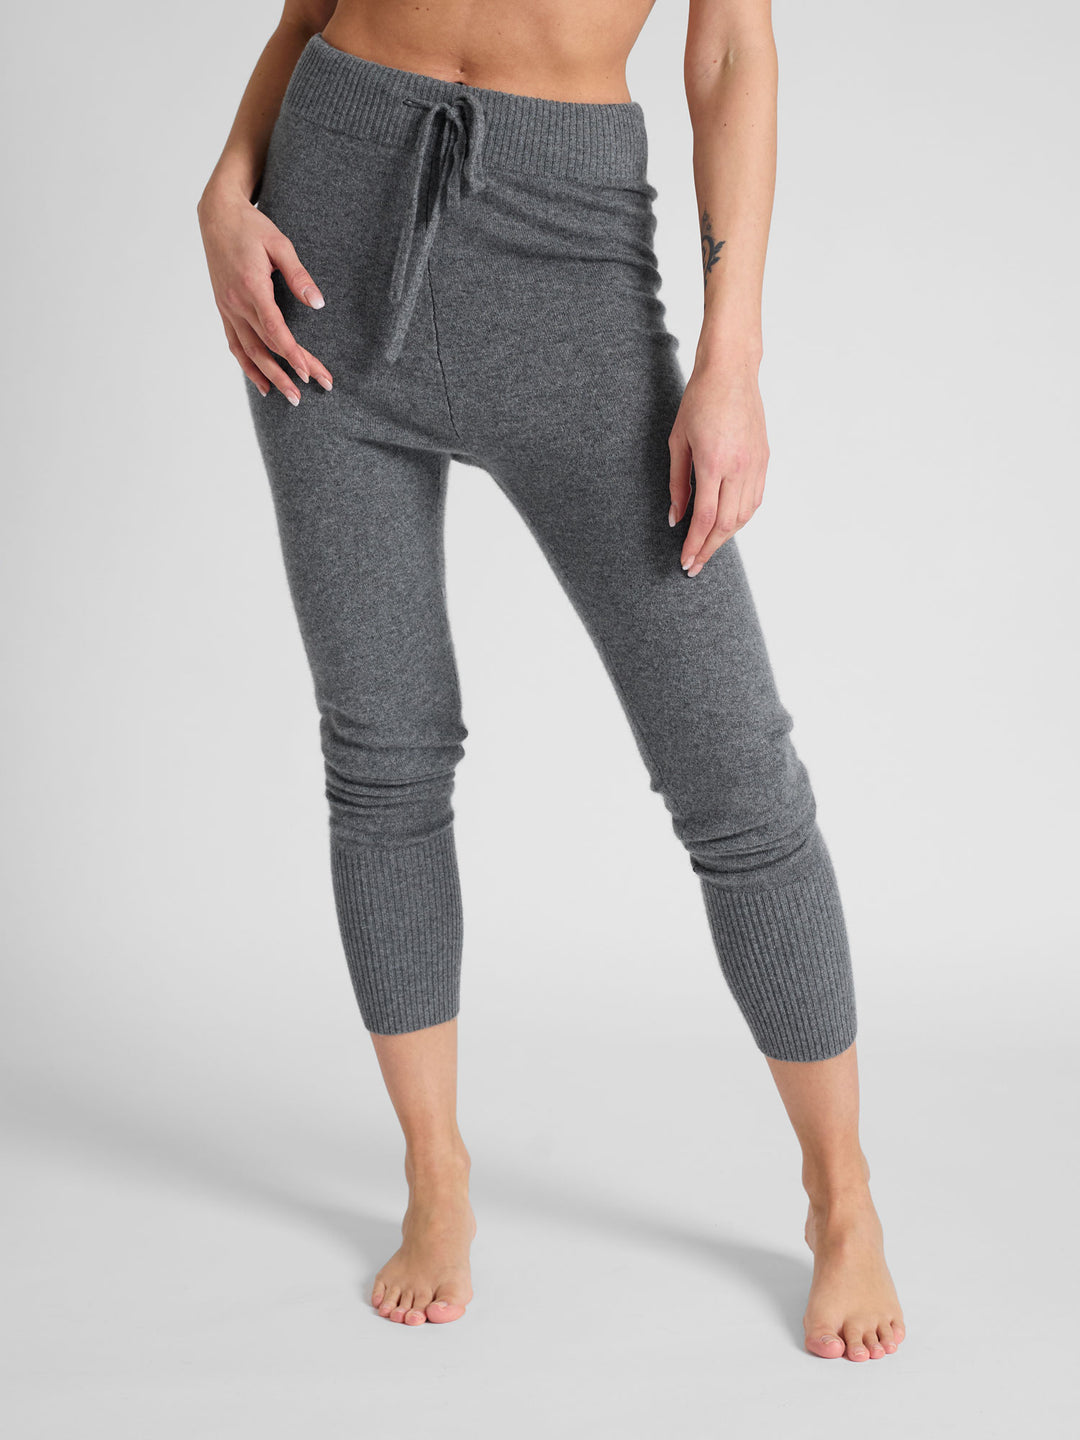 Cashmere pants "Chill Pants" in 100% pure cashmere. color: Dark grey. Scandinavian design by Kashmina.